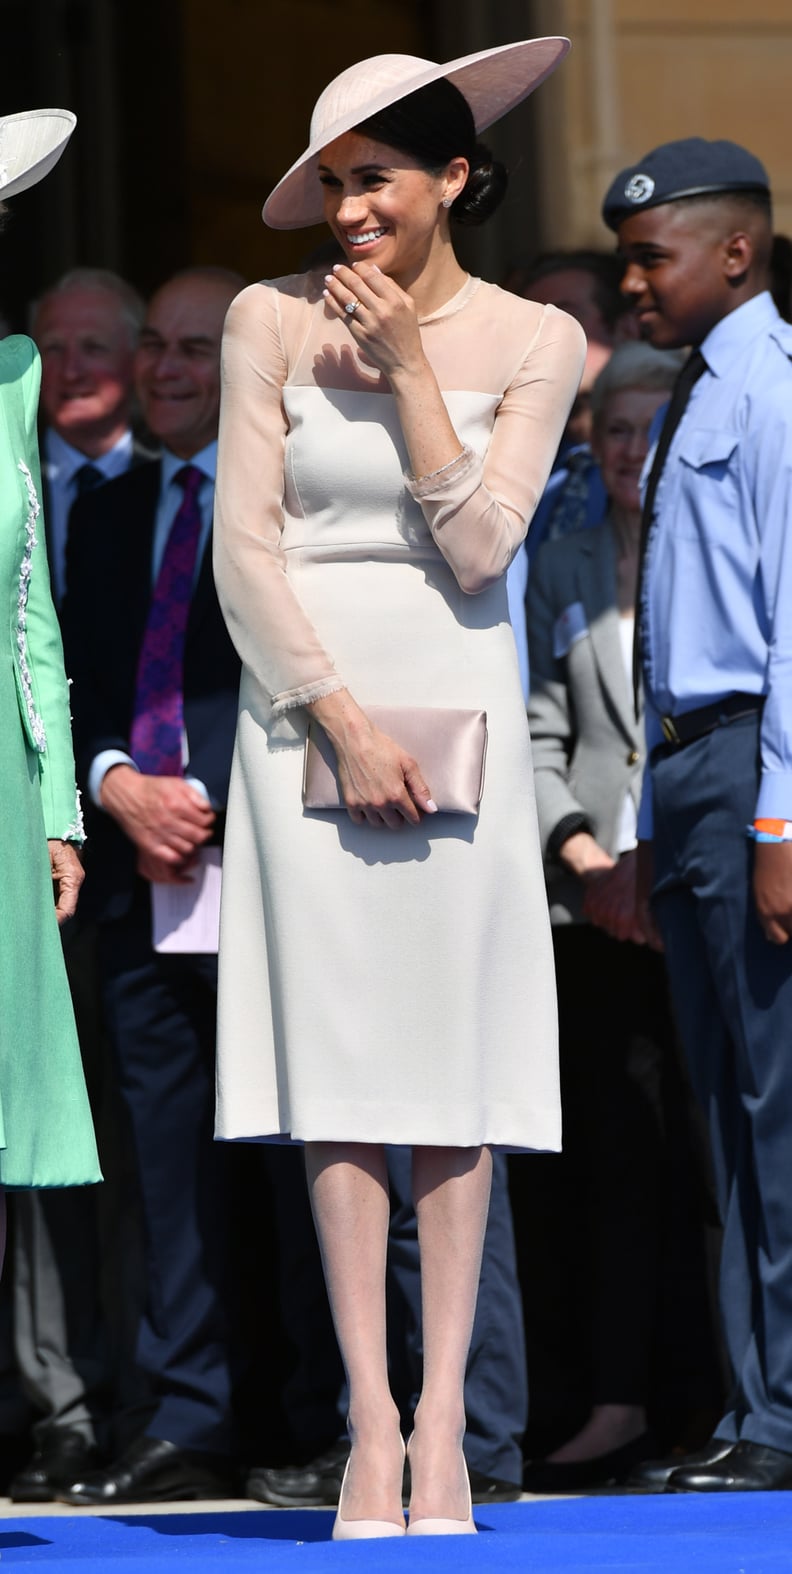 Meghan Markle Attends the Prince of Wales's 70th Birthday Celebration in May 2018